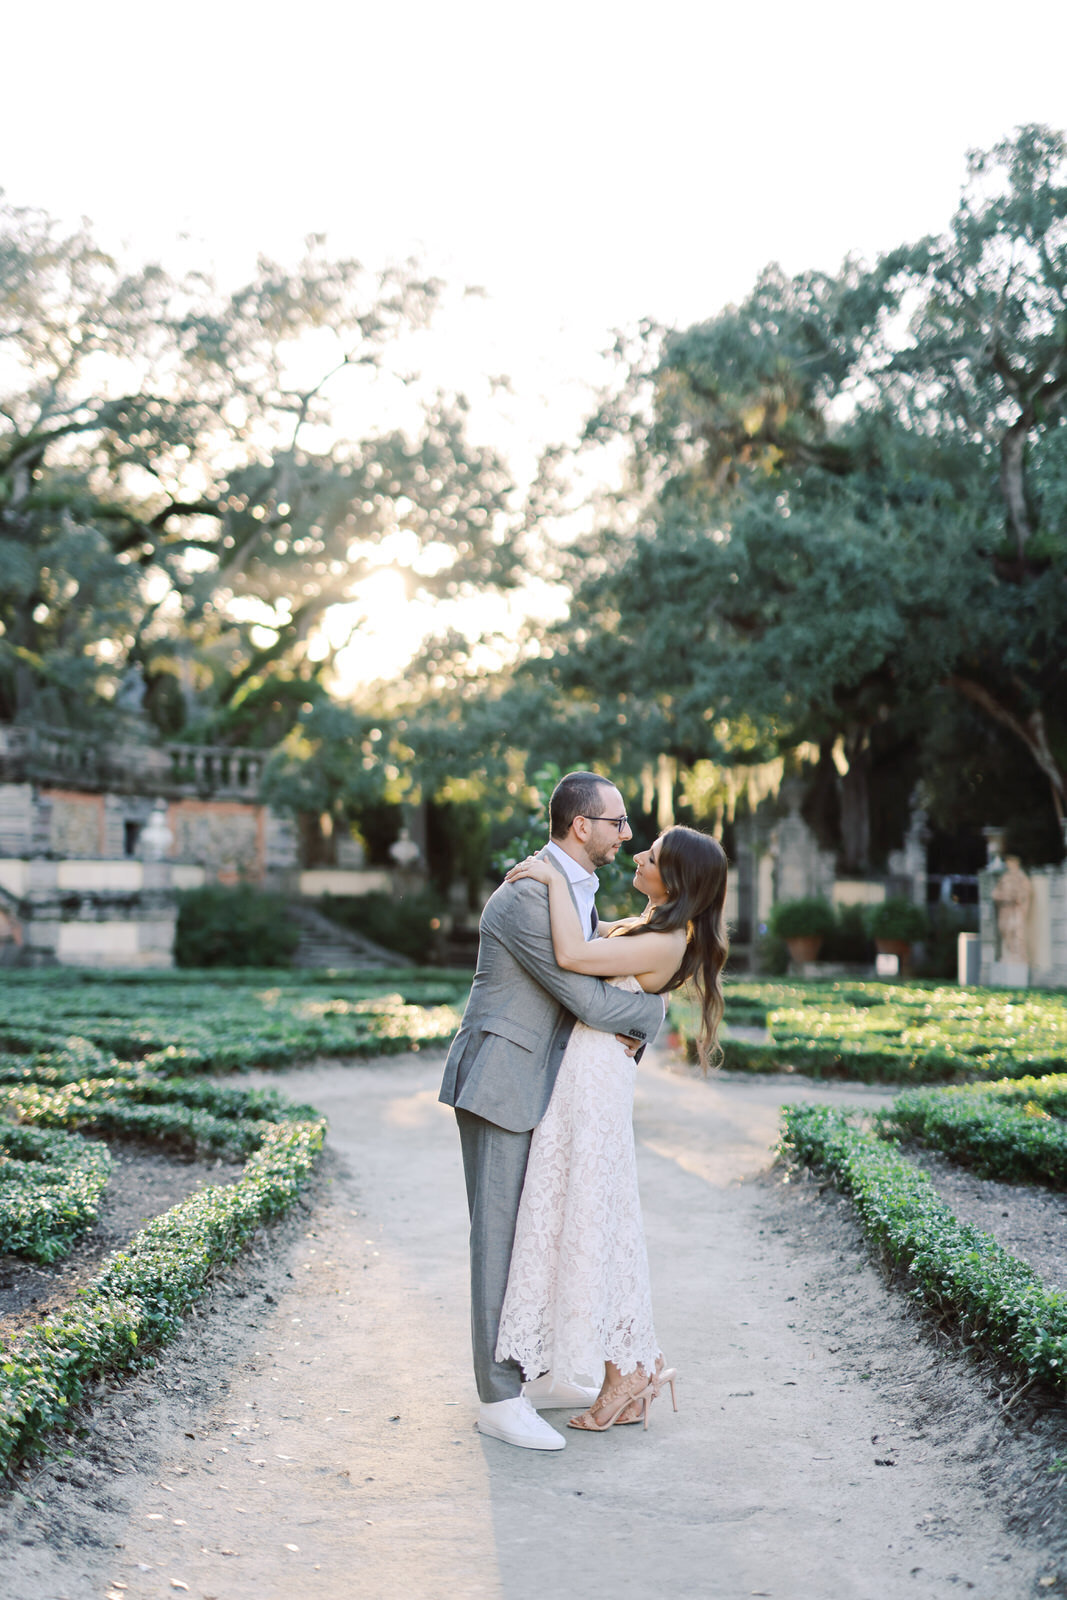 A Stylish and Chic Engagement Session at Vizcaya Museum in Miami Florida 33